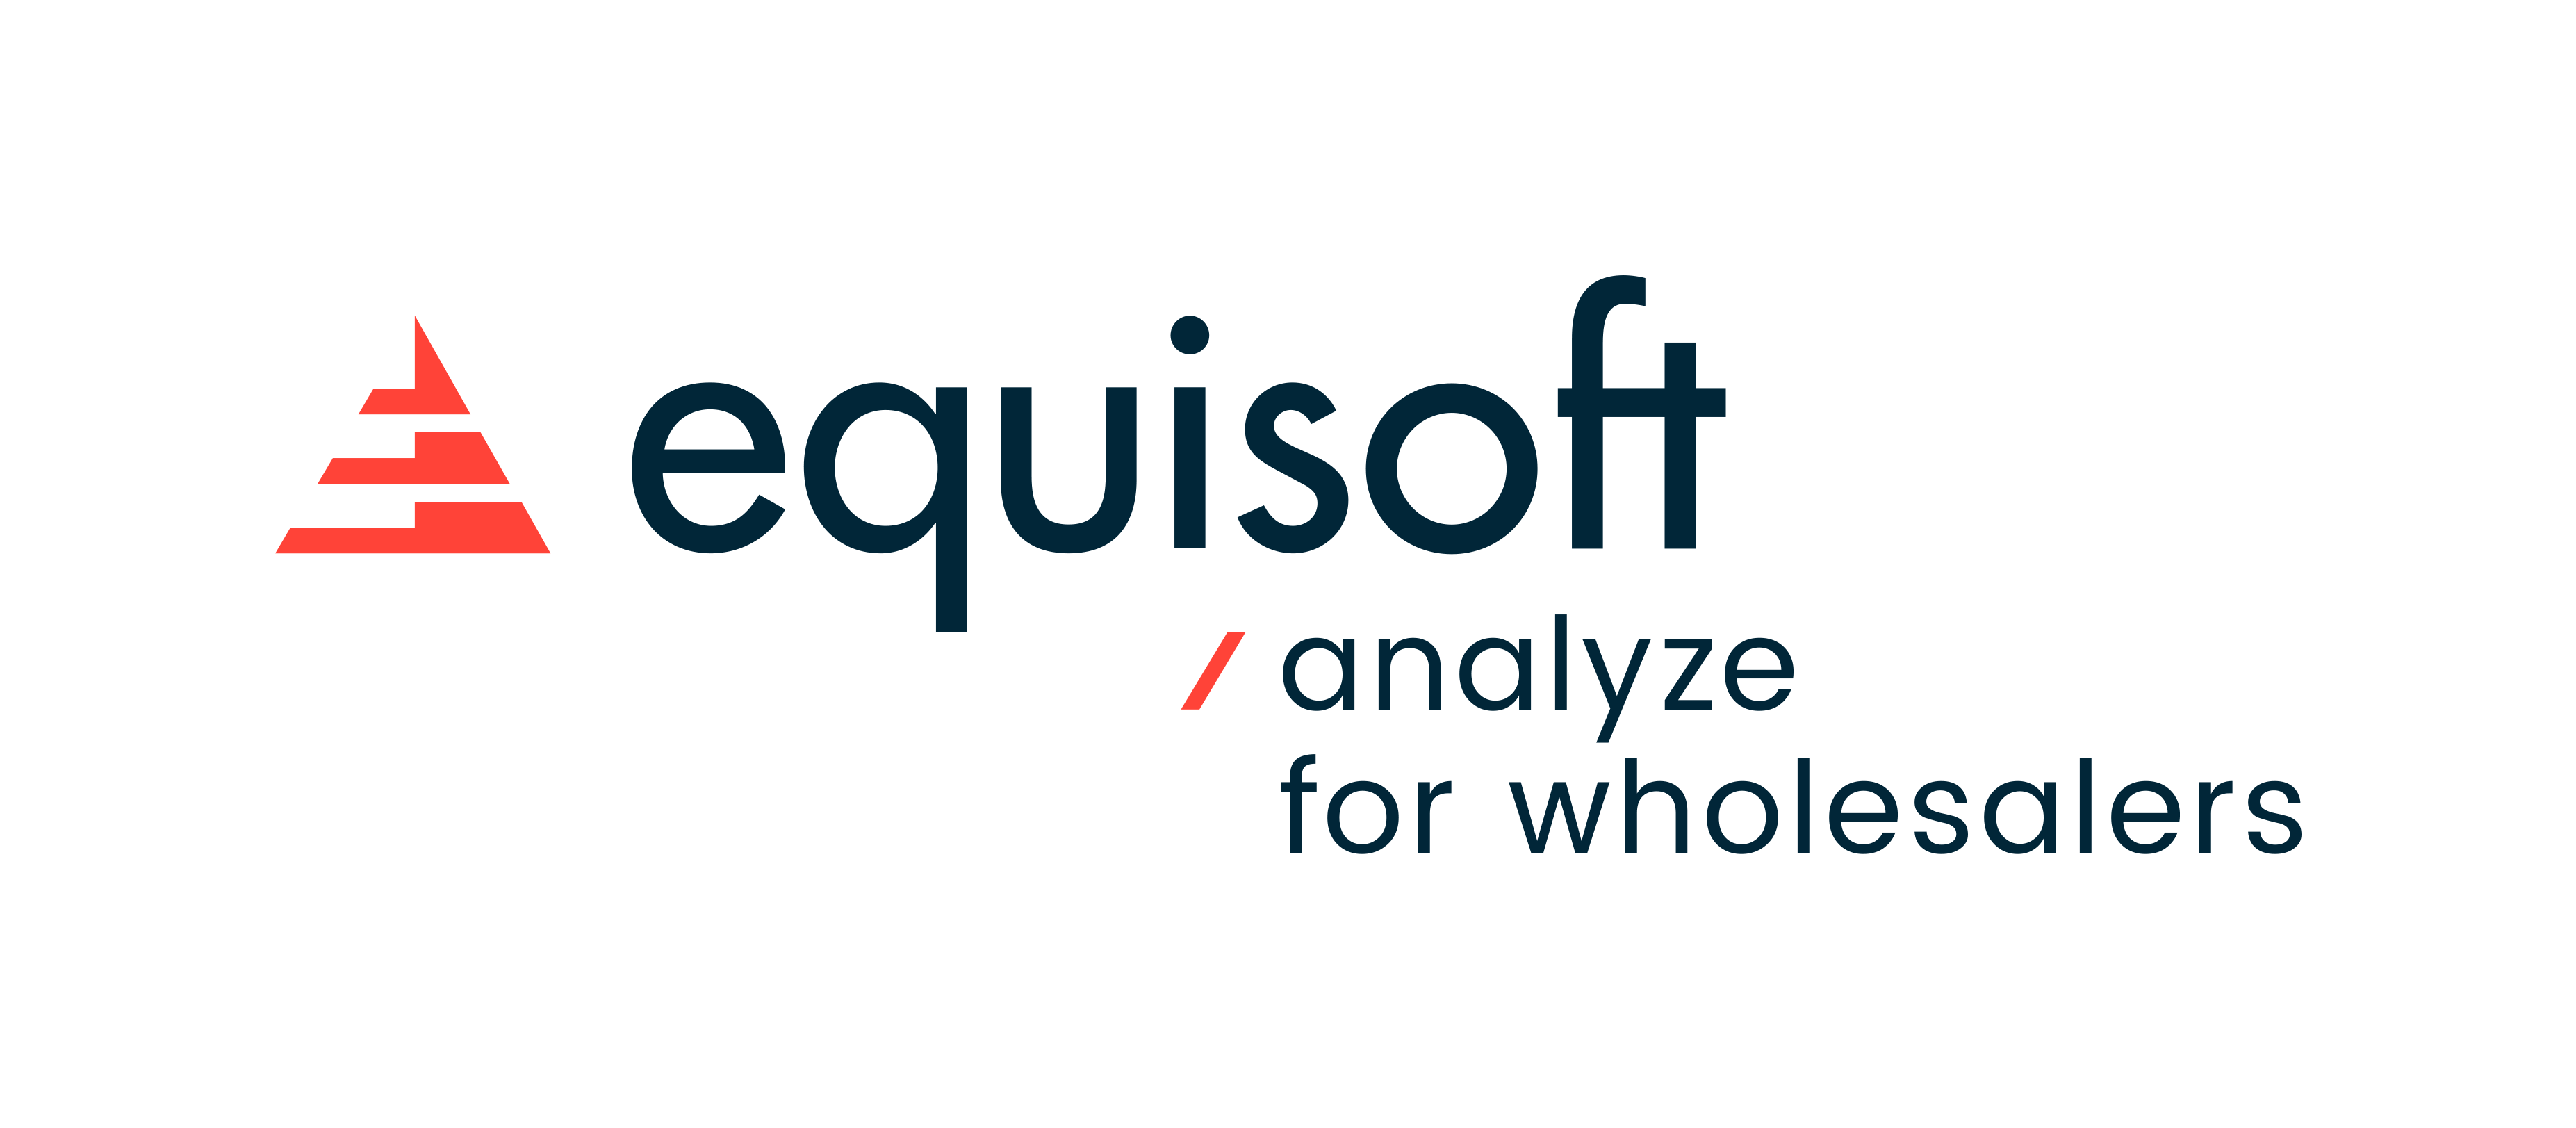 Equisoft/analyze for wholesalers